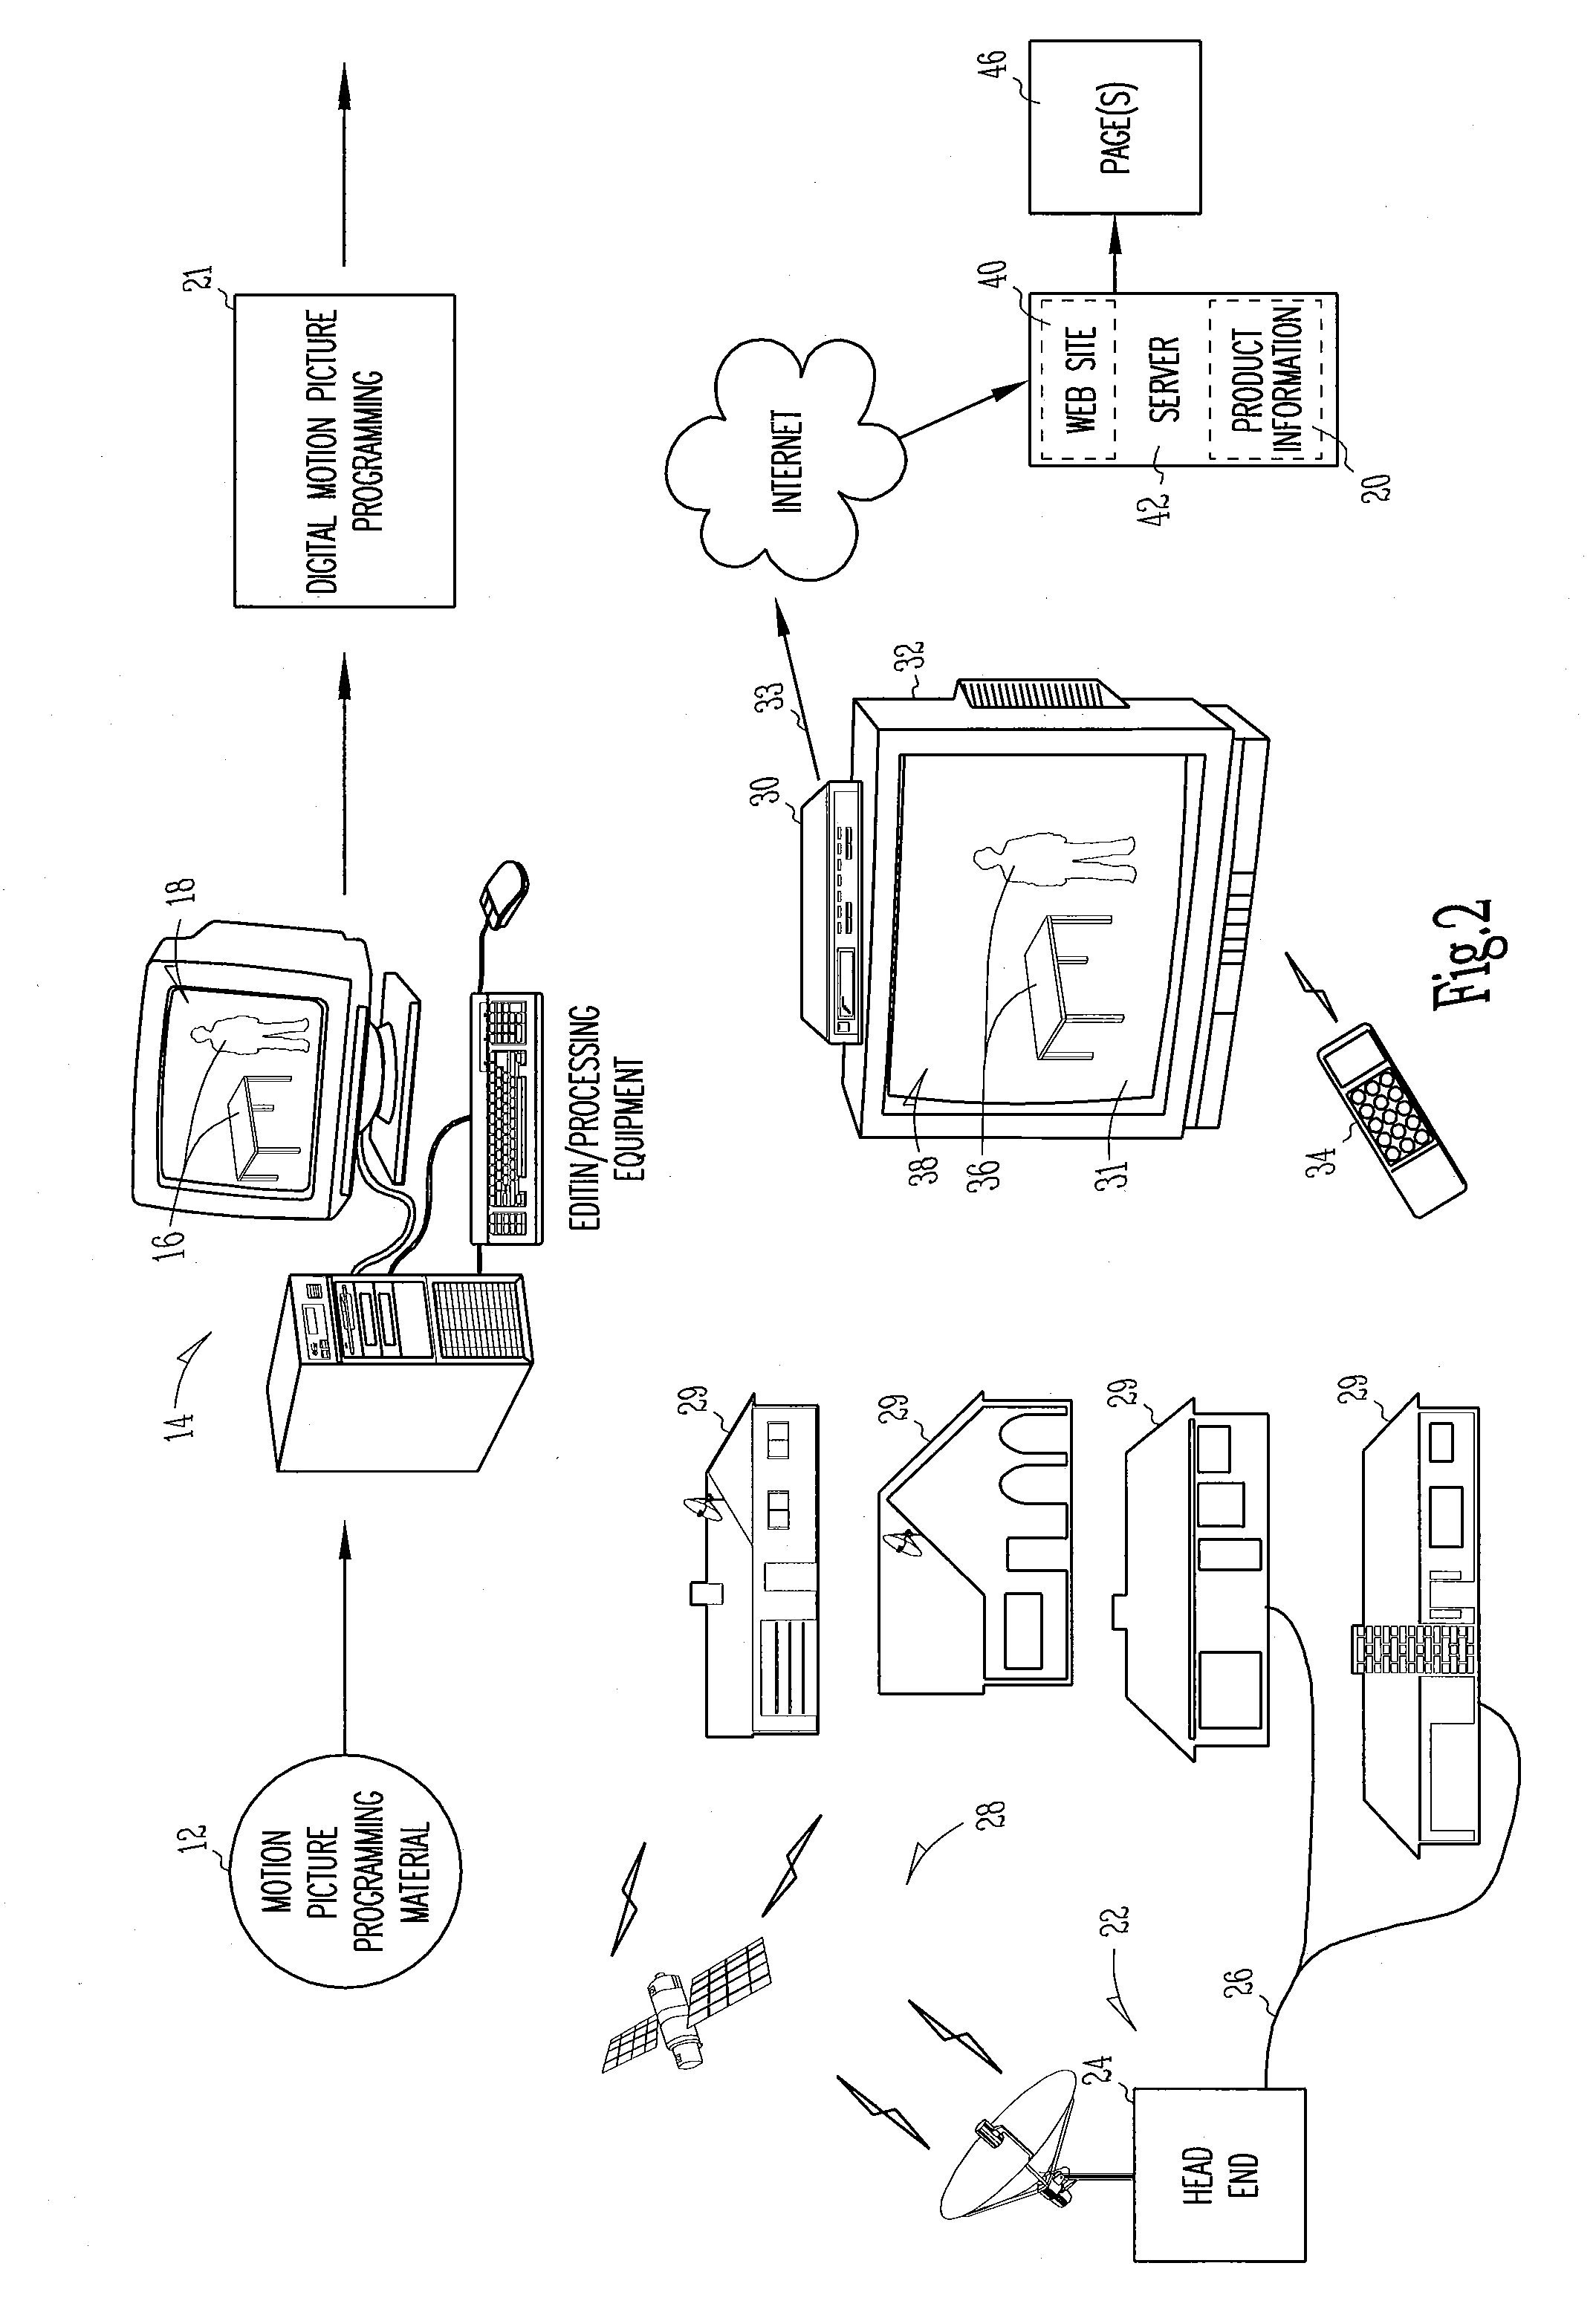 Method and apparatus for displaying information about a beauty product element